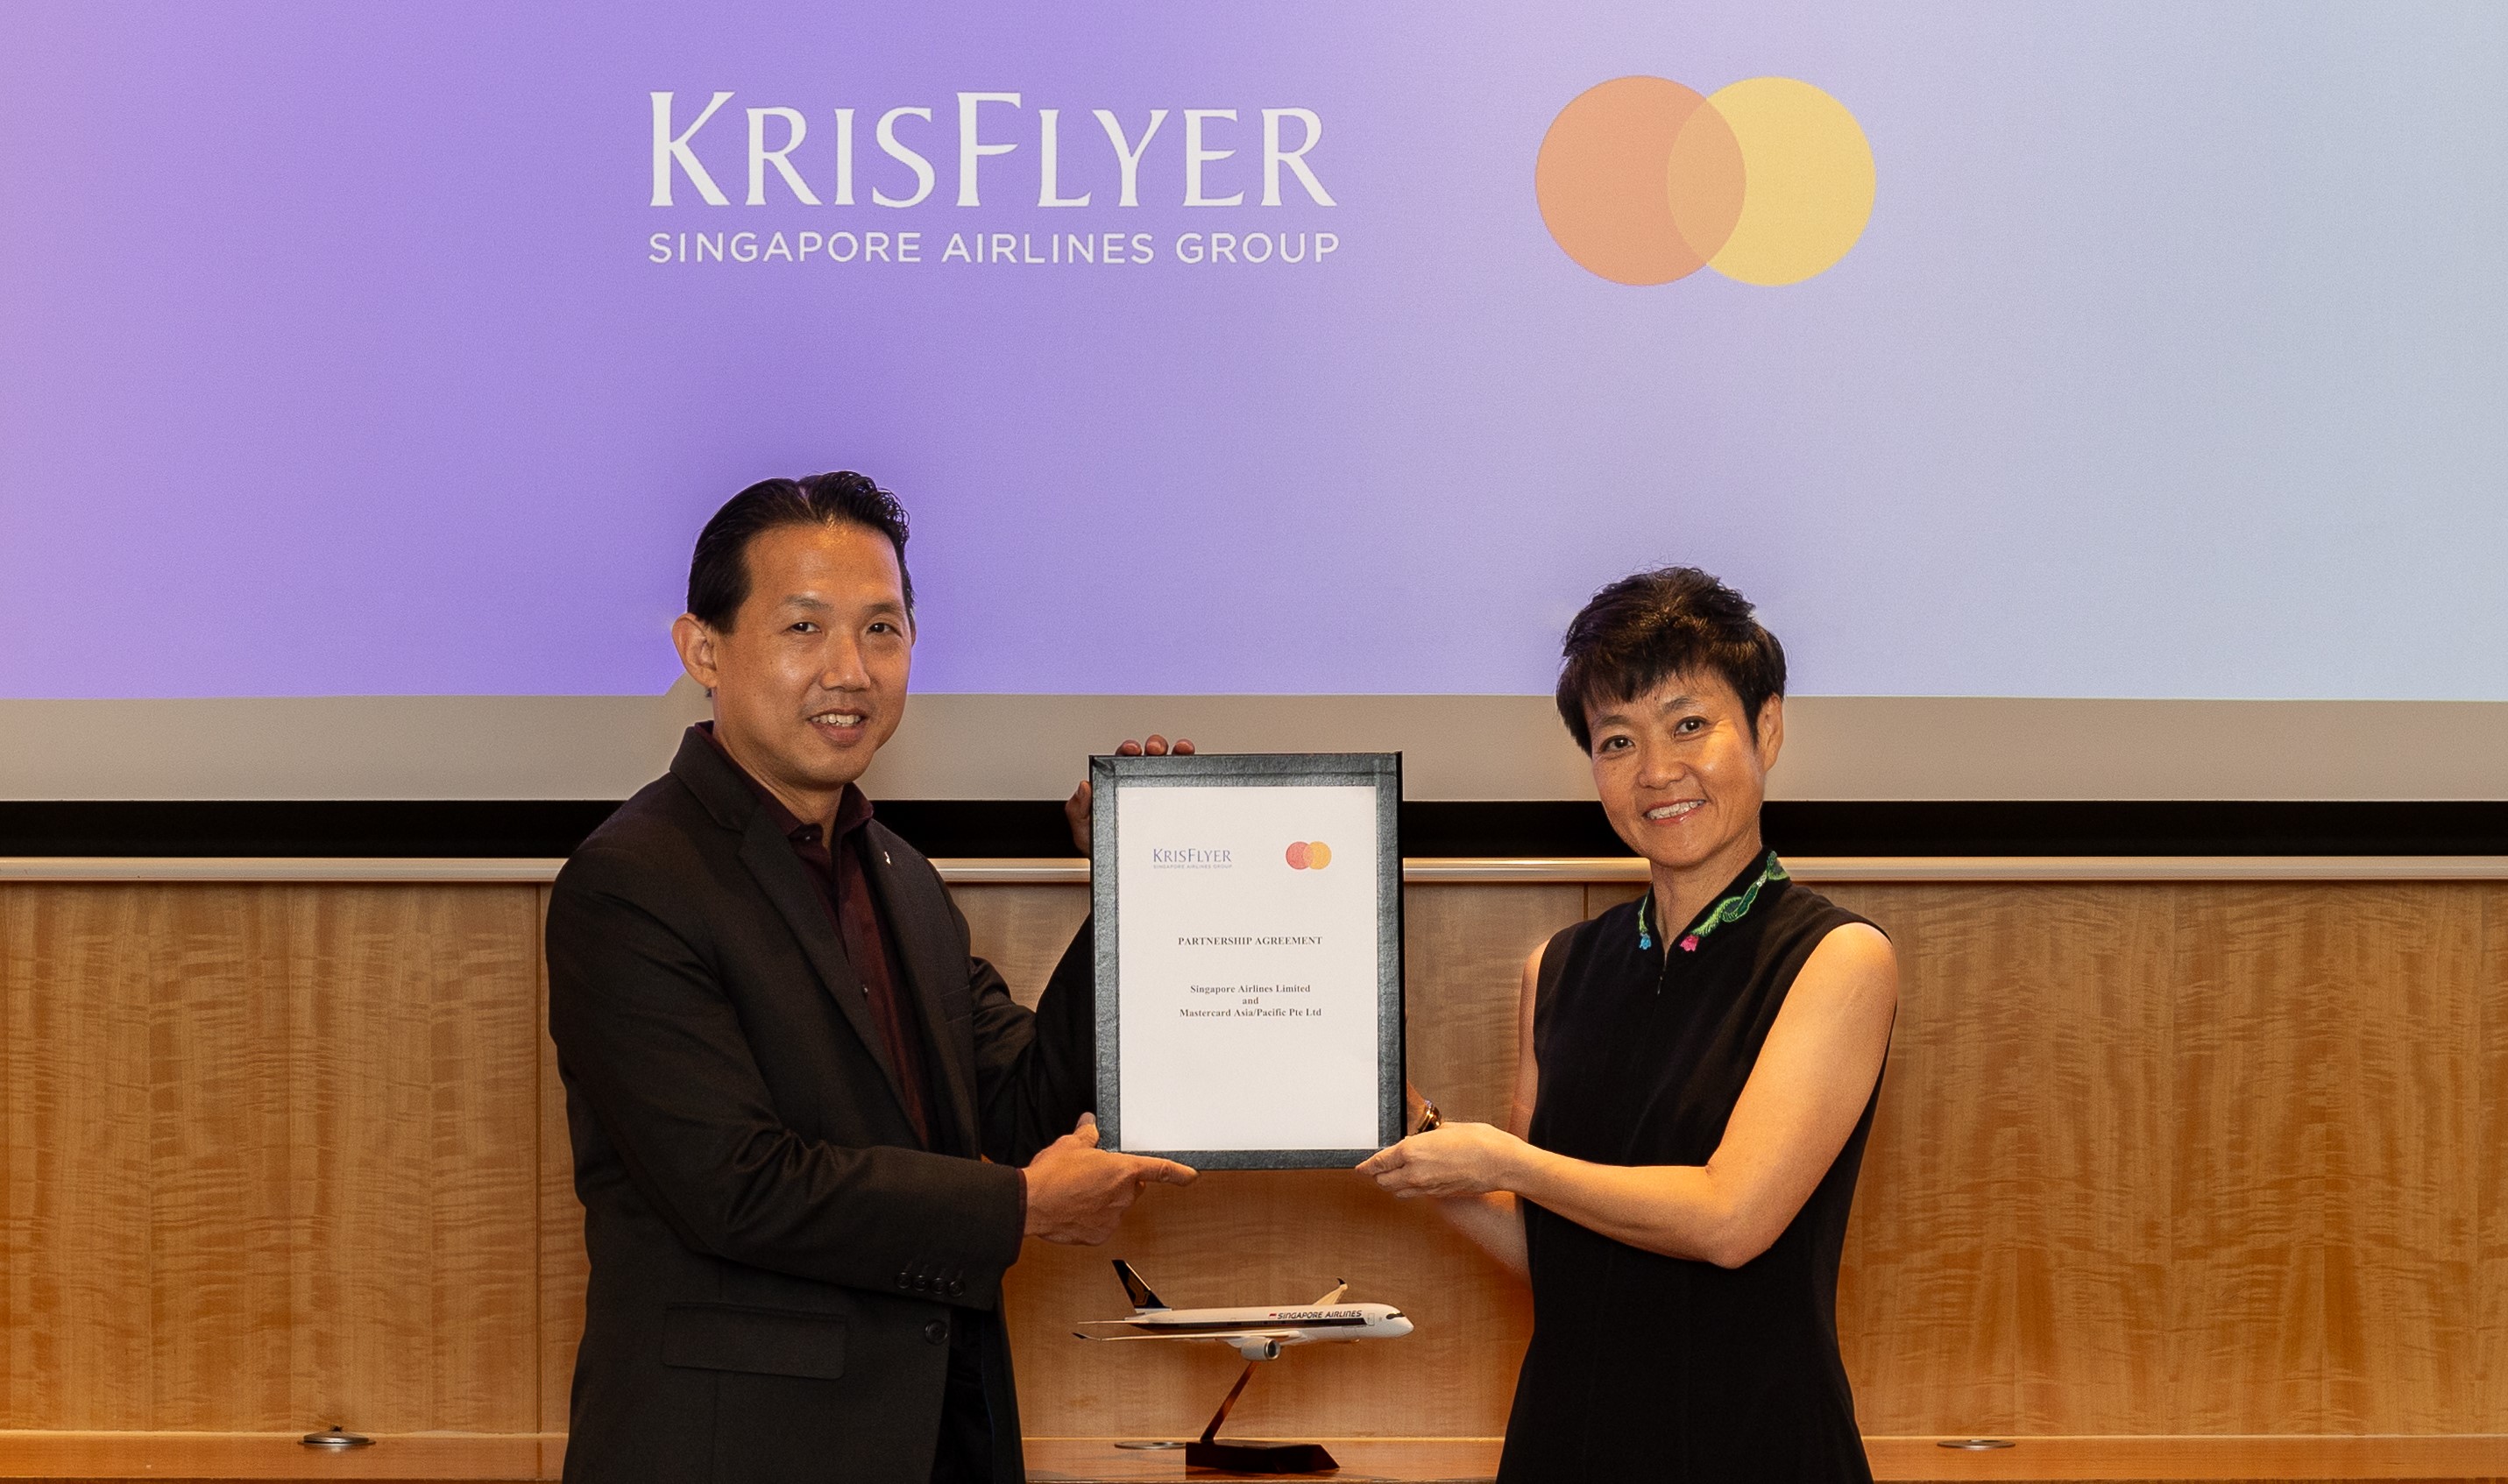 Mr Ryan Pua (left), Divisional Vice President Loyalty Marketing, Singapore Airlines, with Ms Deborah Heng (right), Mastercard’s Country Manager for Singapore, announcing the strategic partnership between Mastercard and Singapore Airlines to enrich travel experiences for cardholders.